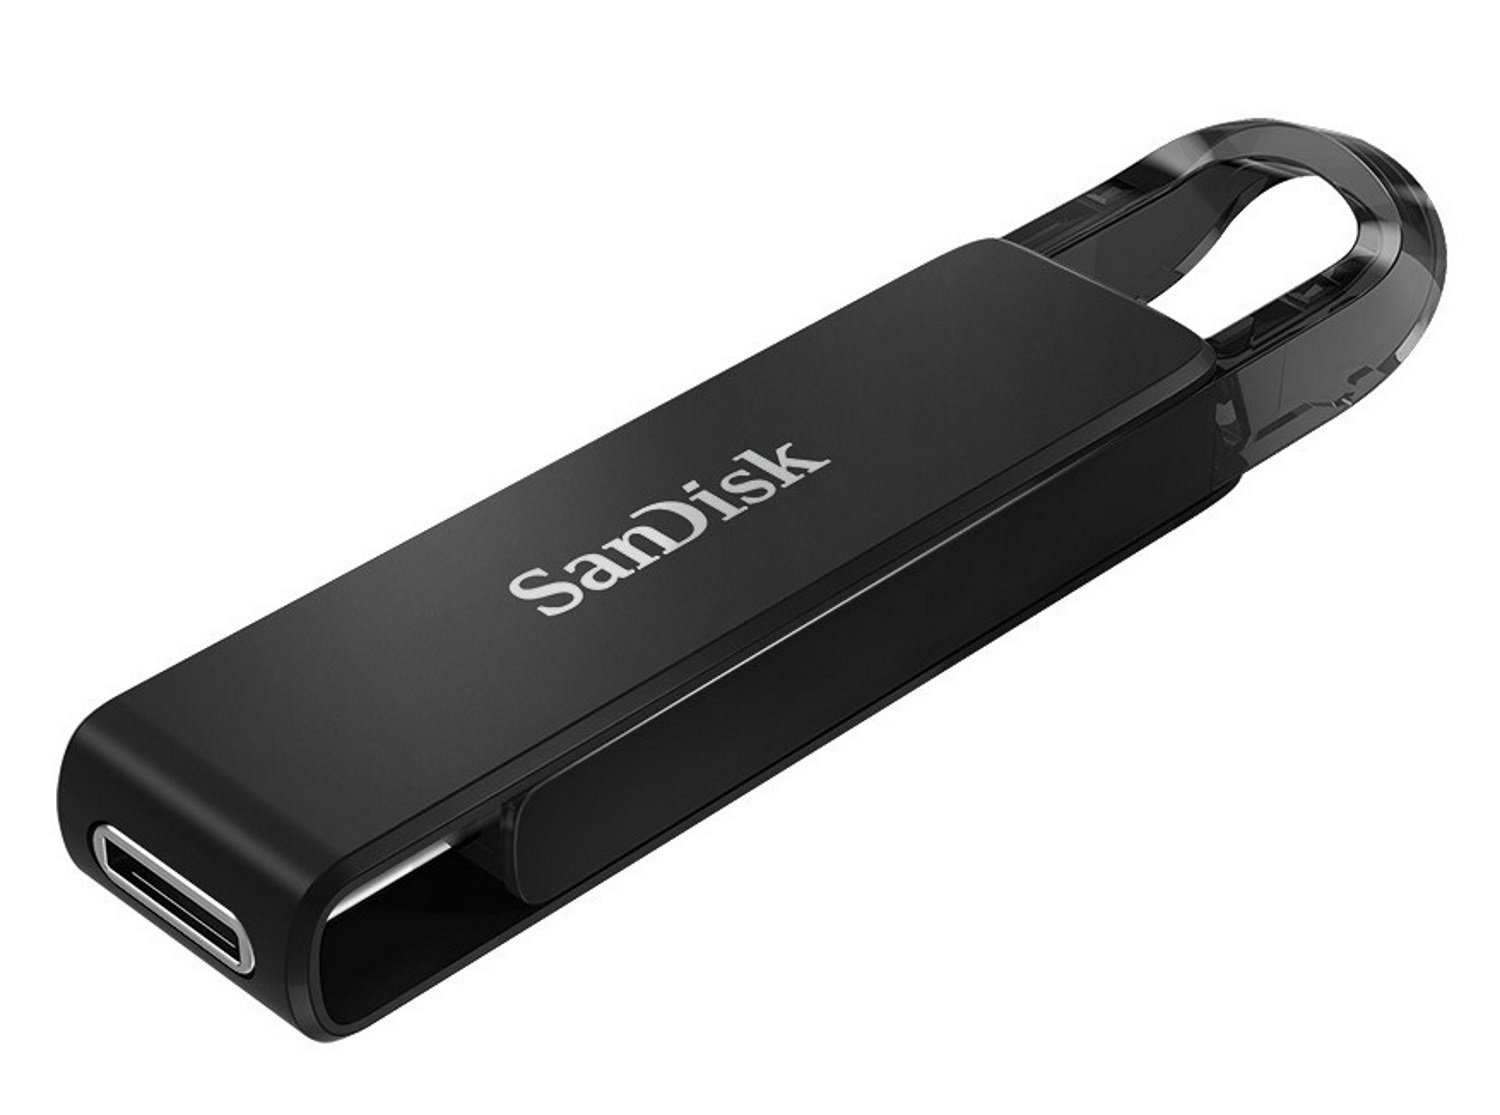 SanDisk Ultra USB 3.1 Type-C Flash Drive Review